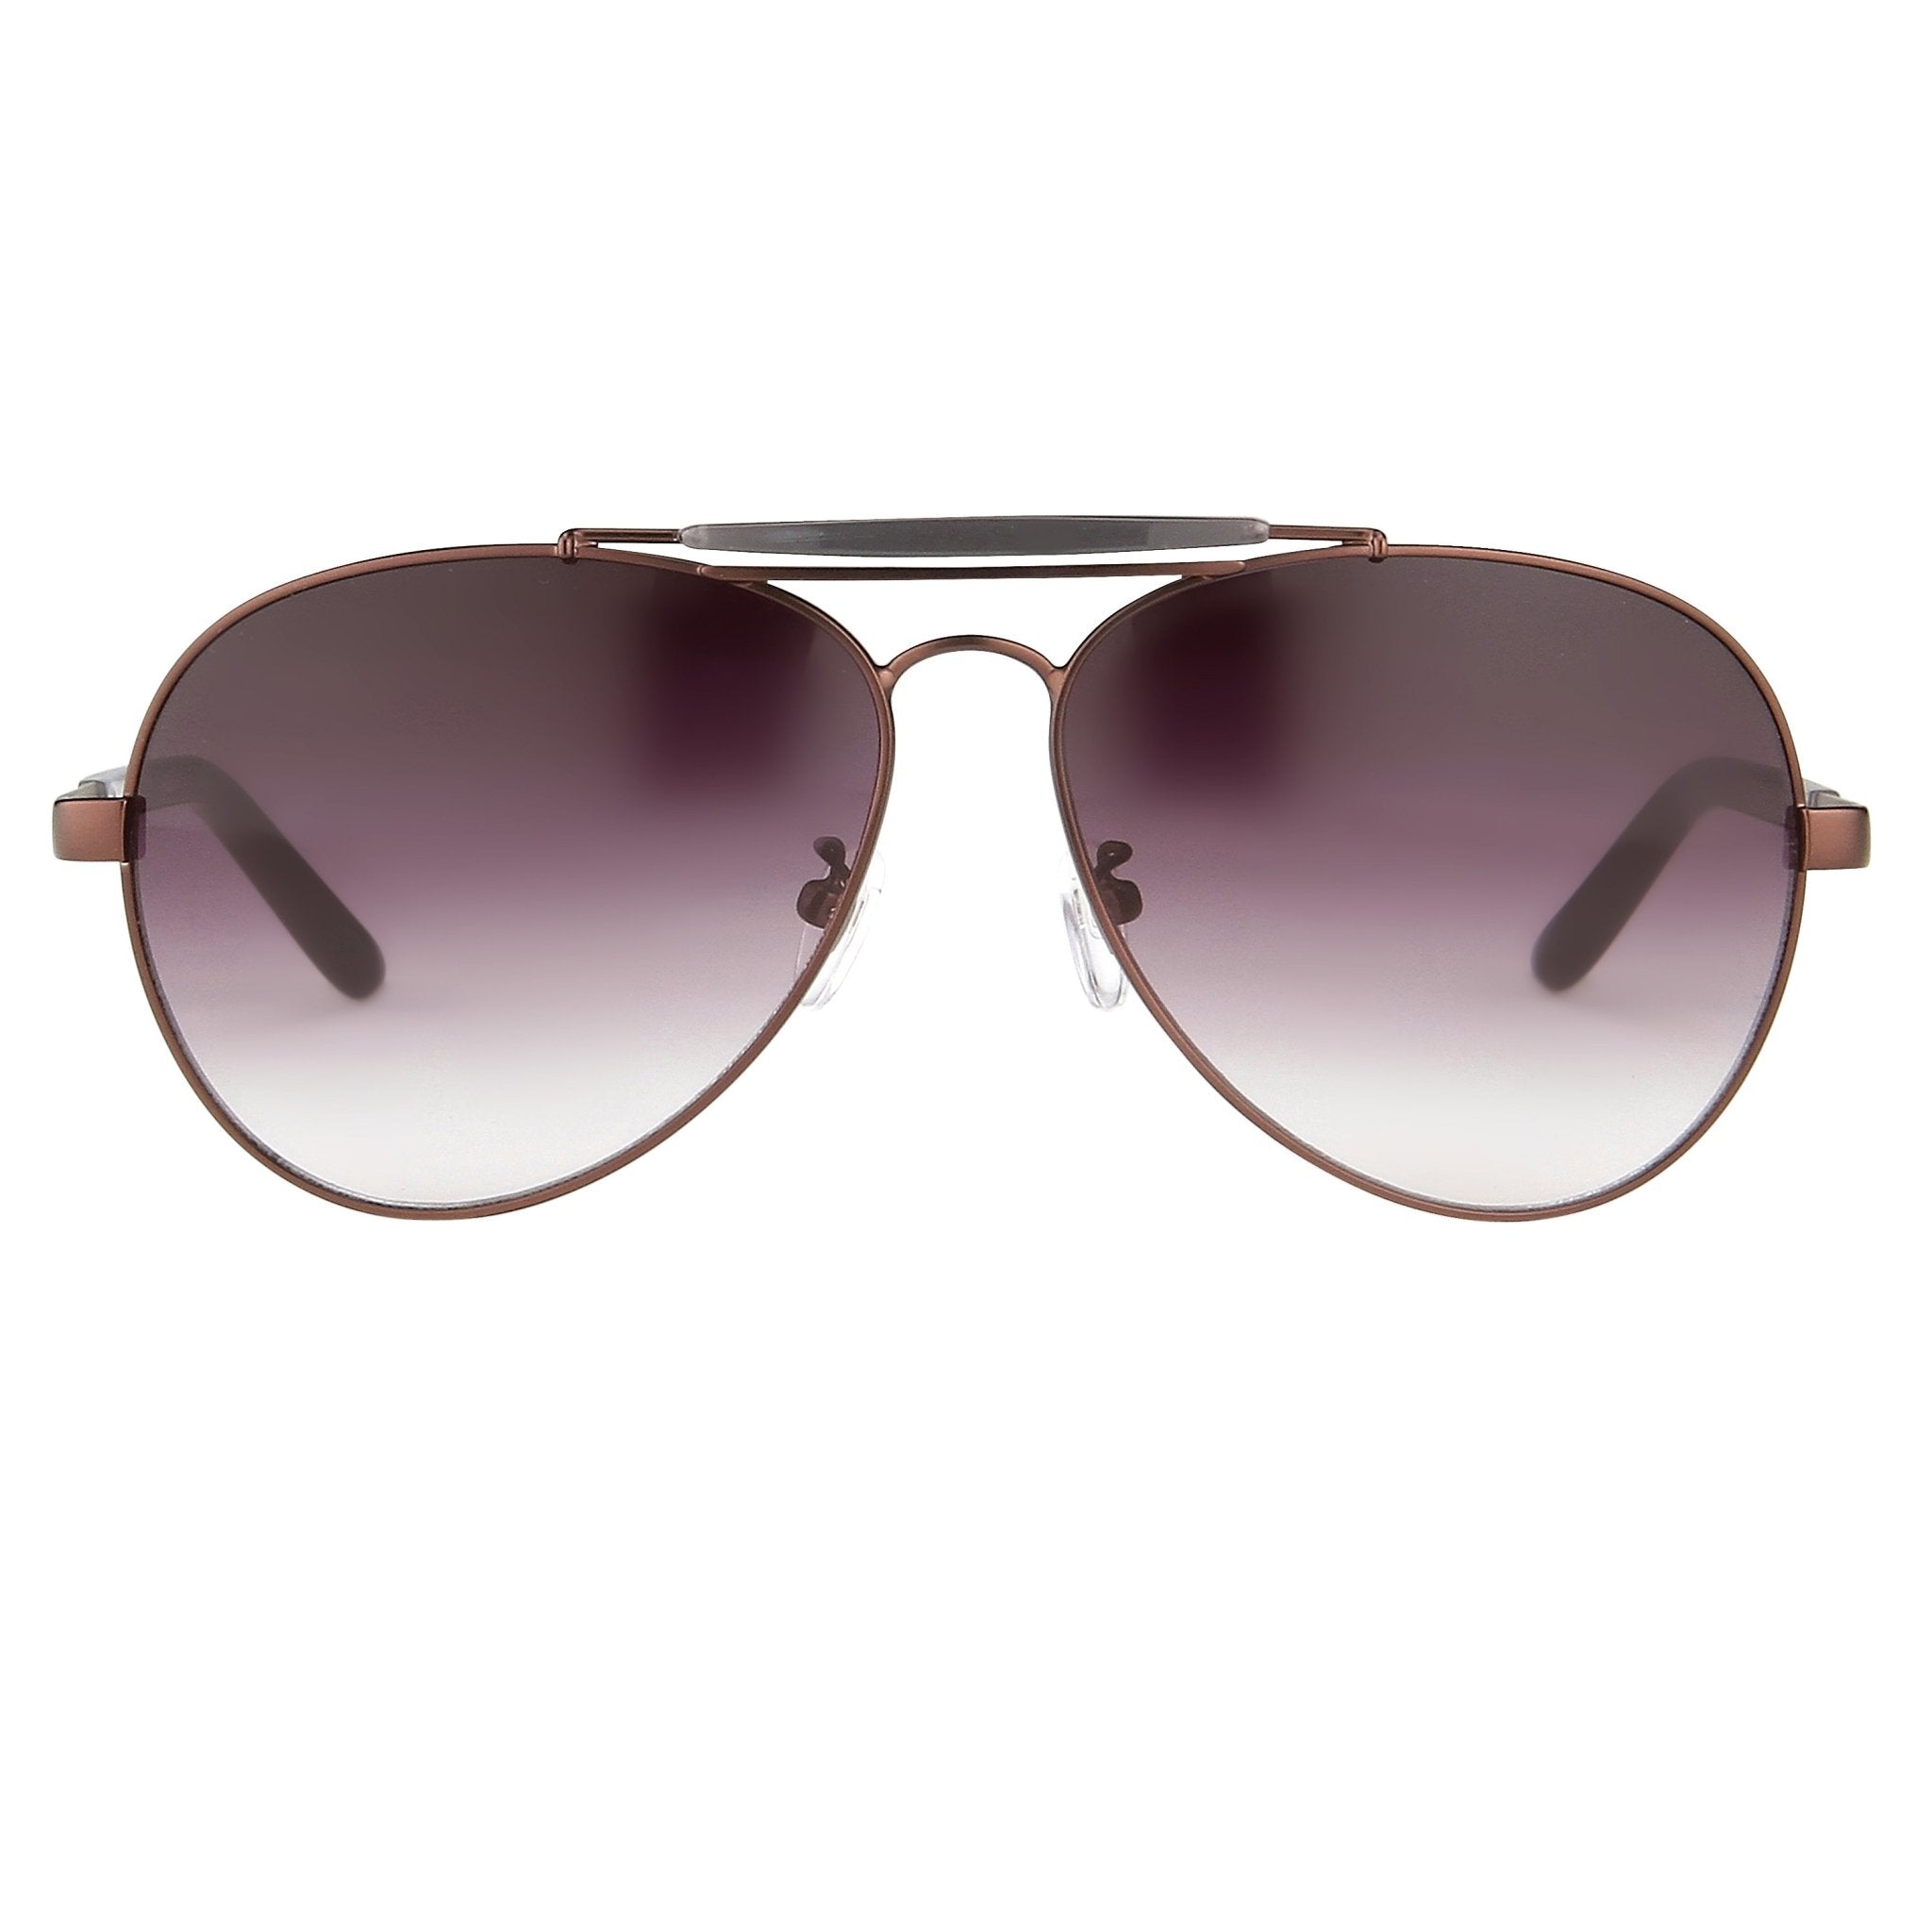 Agent Provocateur Sunglasses Bronze Grey - Watches & Crystals